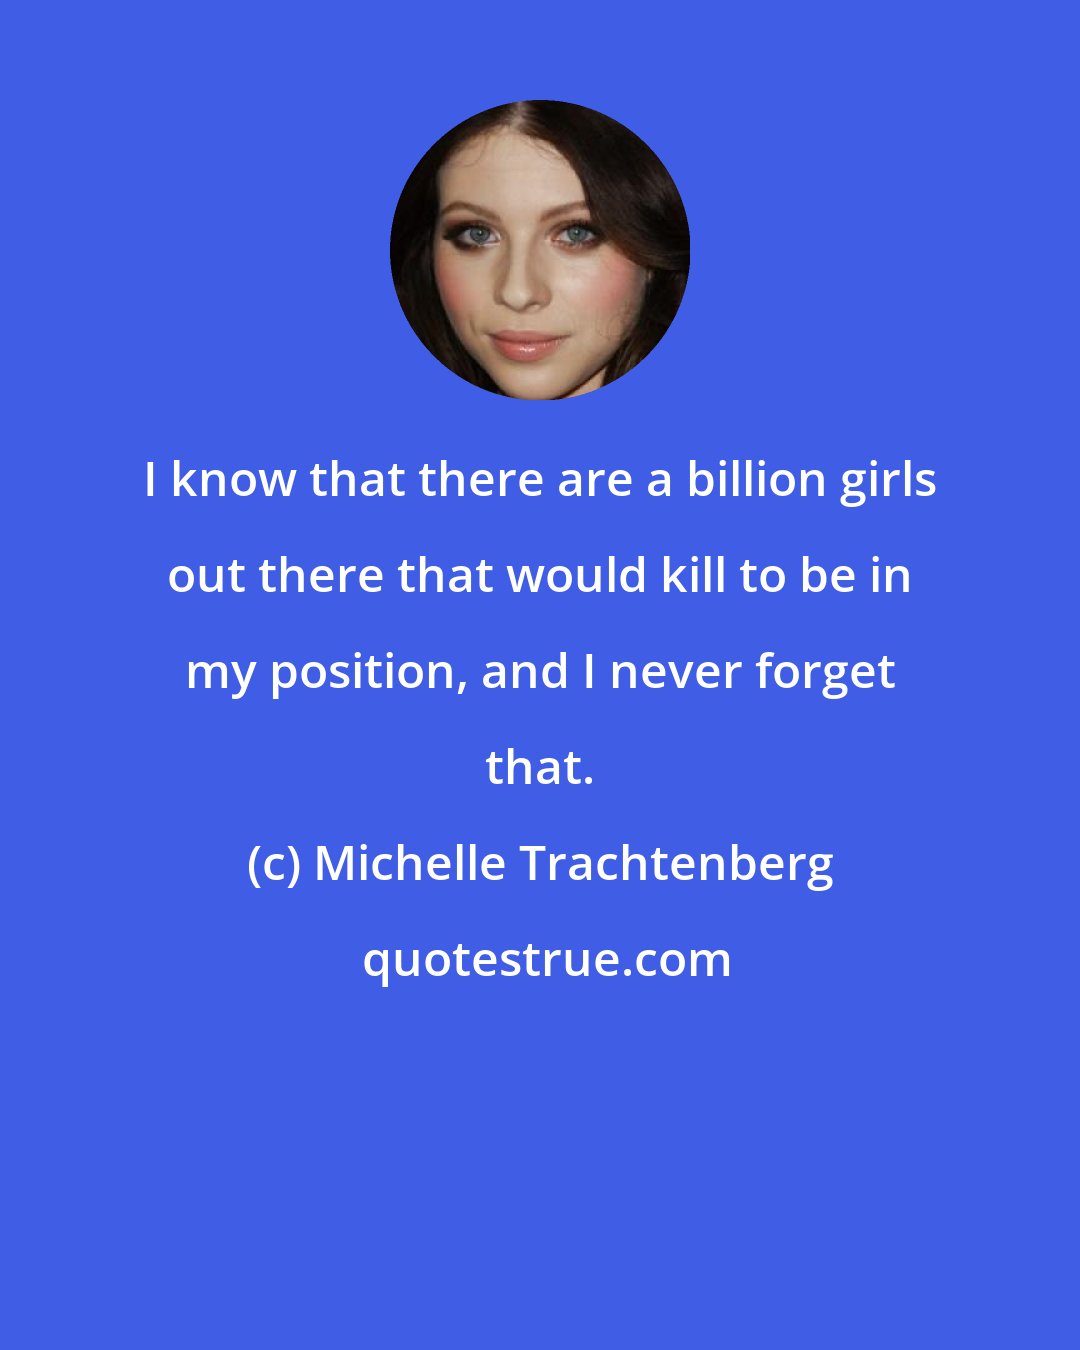 Michelle Trachtenberg: I know that there are a billion girls out there that would kill to be in my position, and I never forget that.